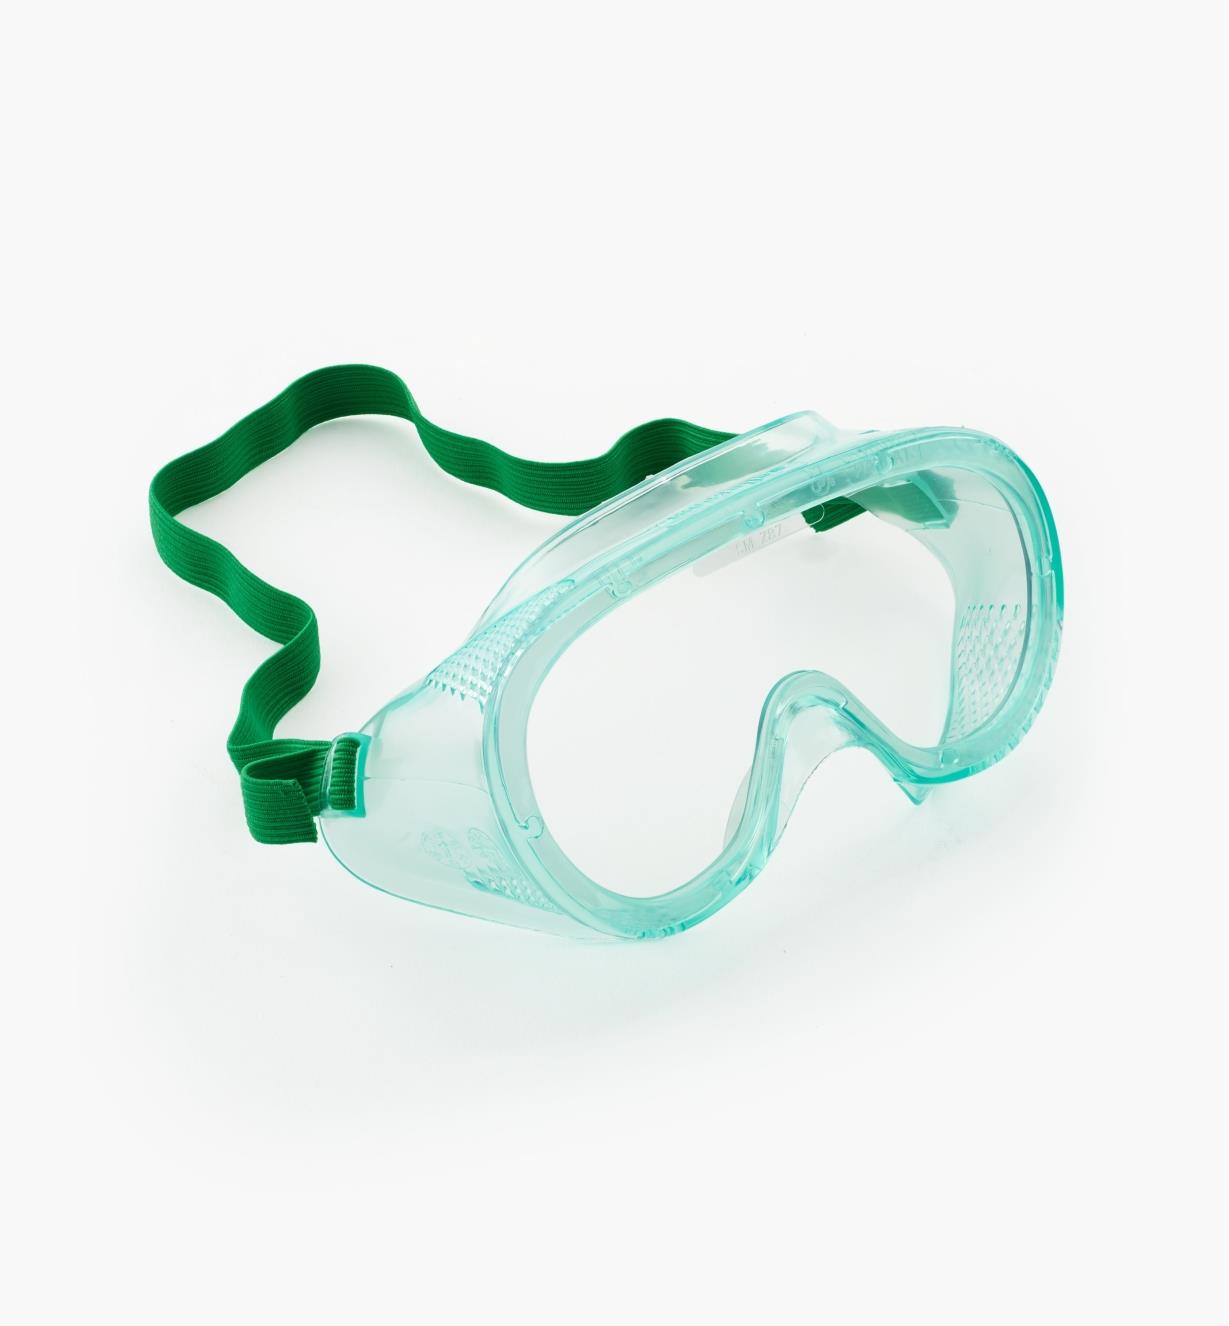 22R3001 - Child's Safety Goggles, ea.